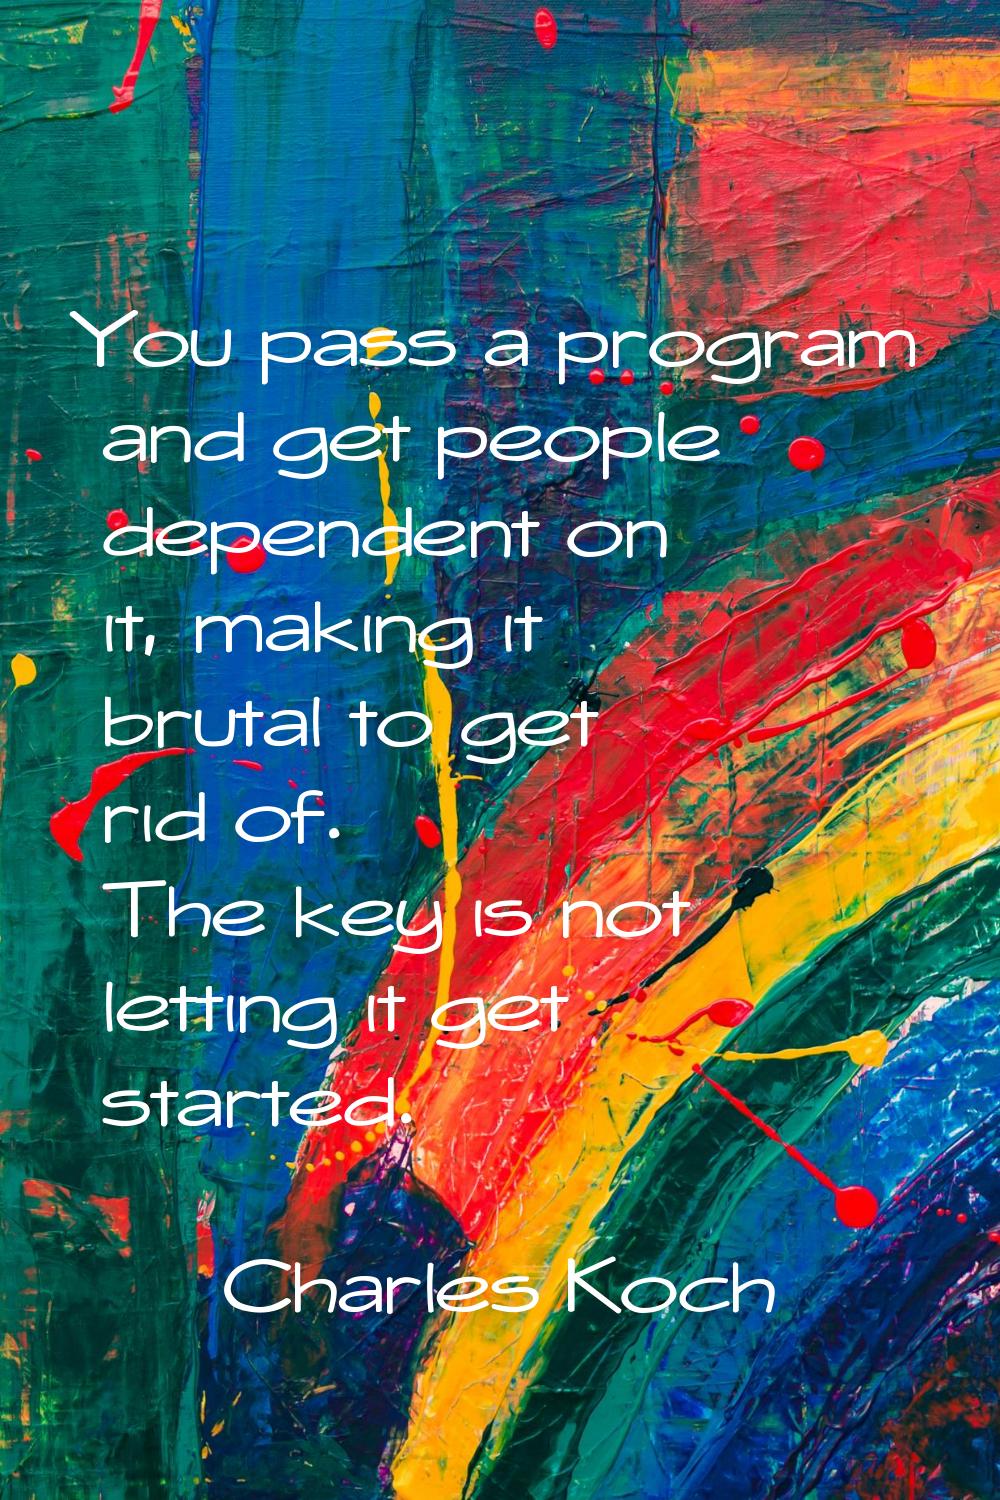 You pass a program and get people dependent on it, making it brutal to get rid of. The key is not l